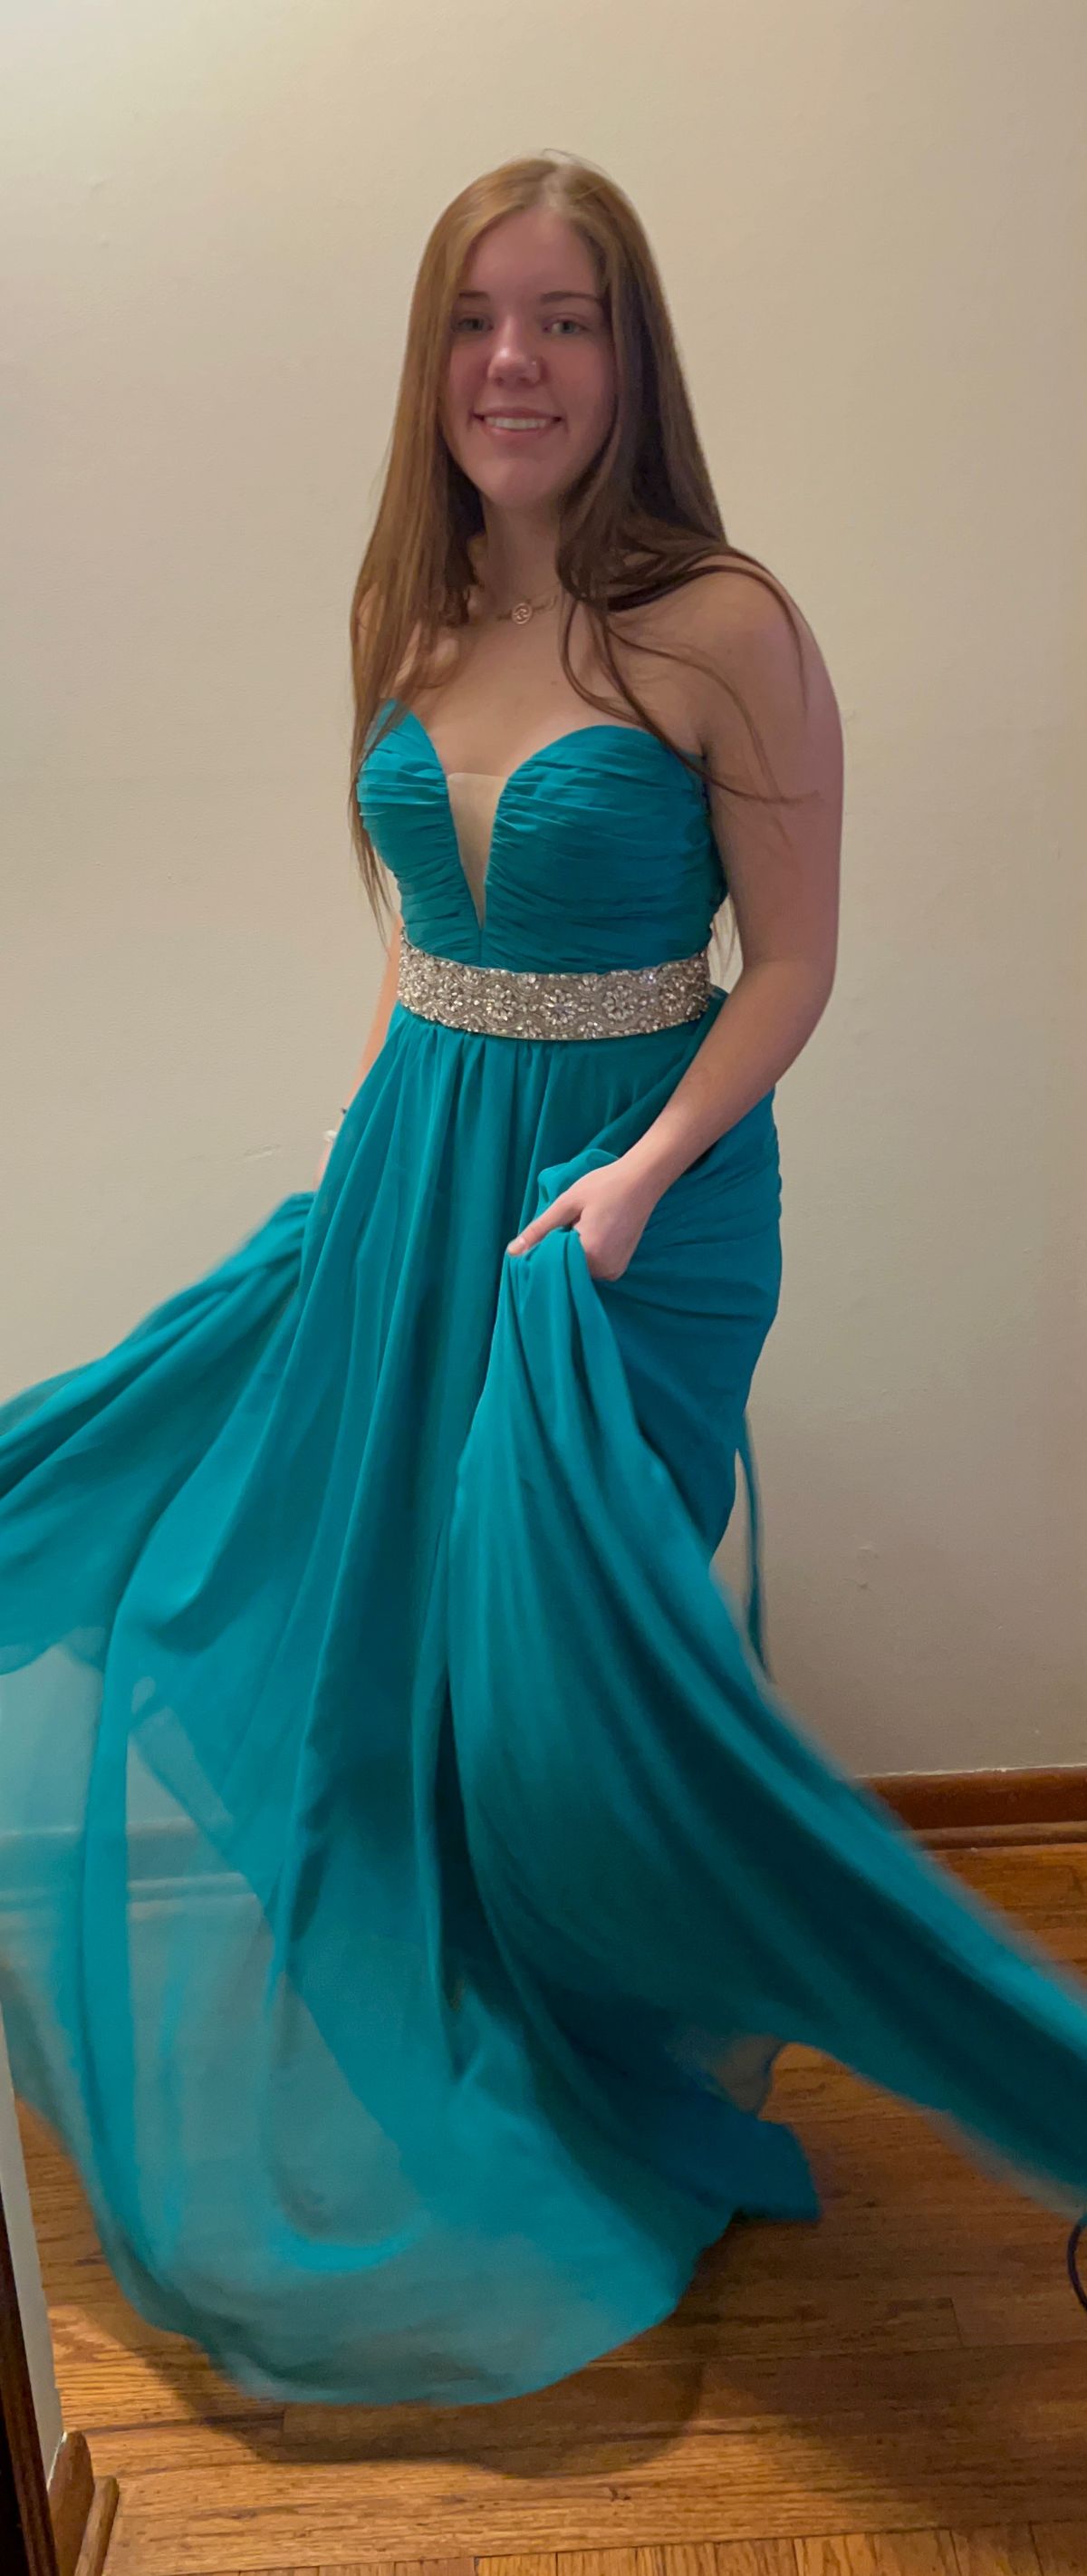 Faviana Size 2 Prom Green A-line Dress on Queenly